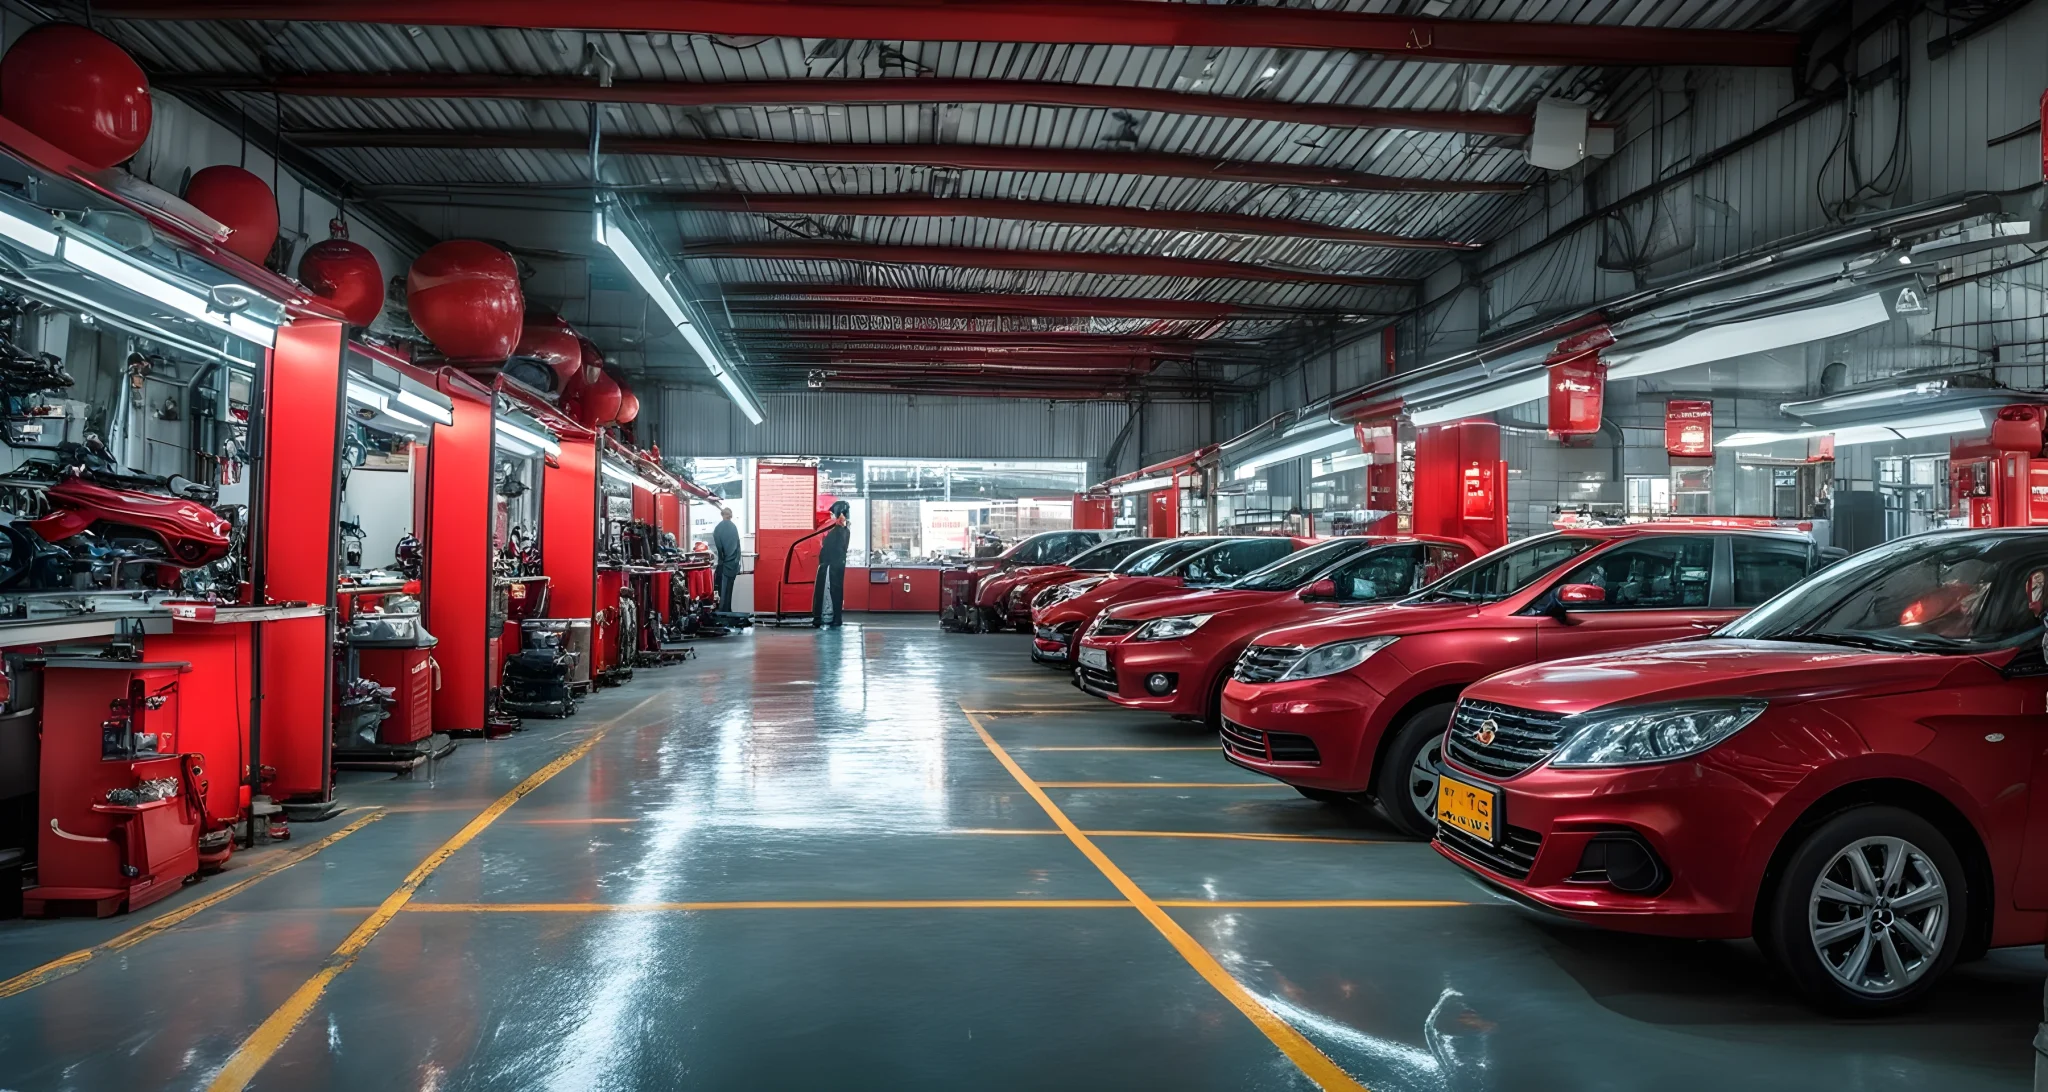 The image shows a row of car detailing and maintenance shops in a bustling city in China. The shops are equipped with modern tools and equipment for servicing vehicles.